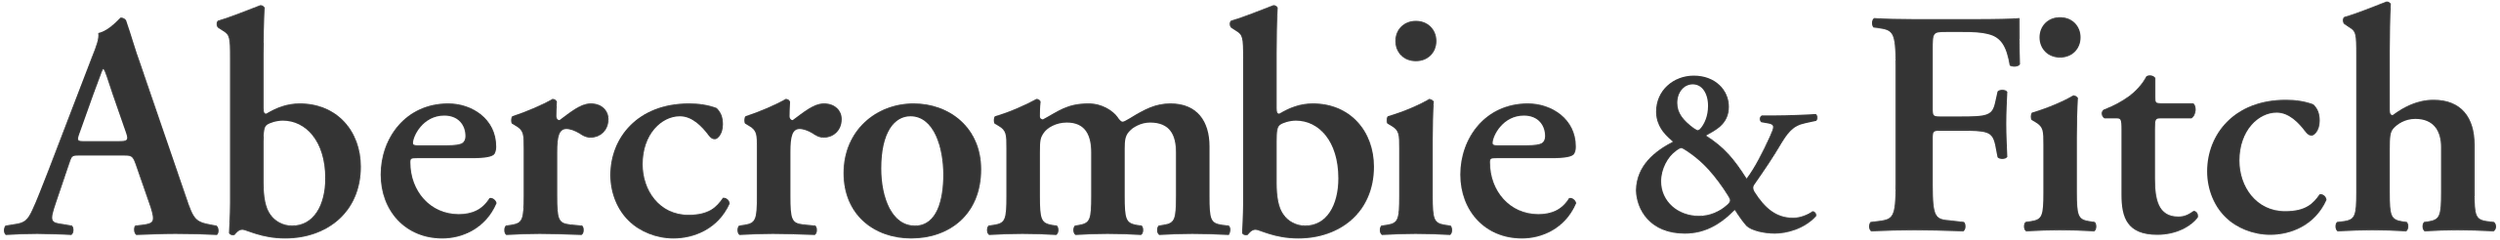 Abercrombie_&_Fitch_logo.svg.png